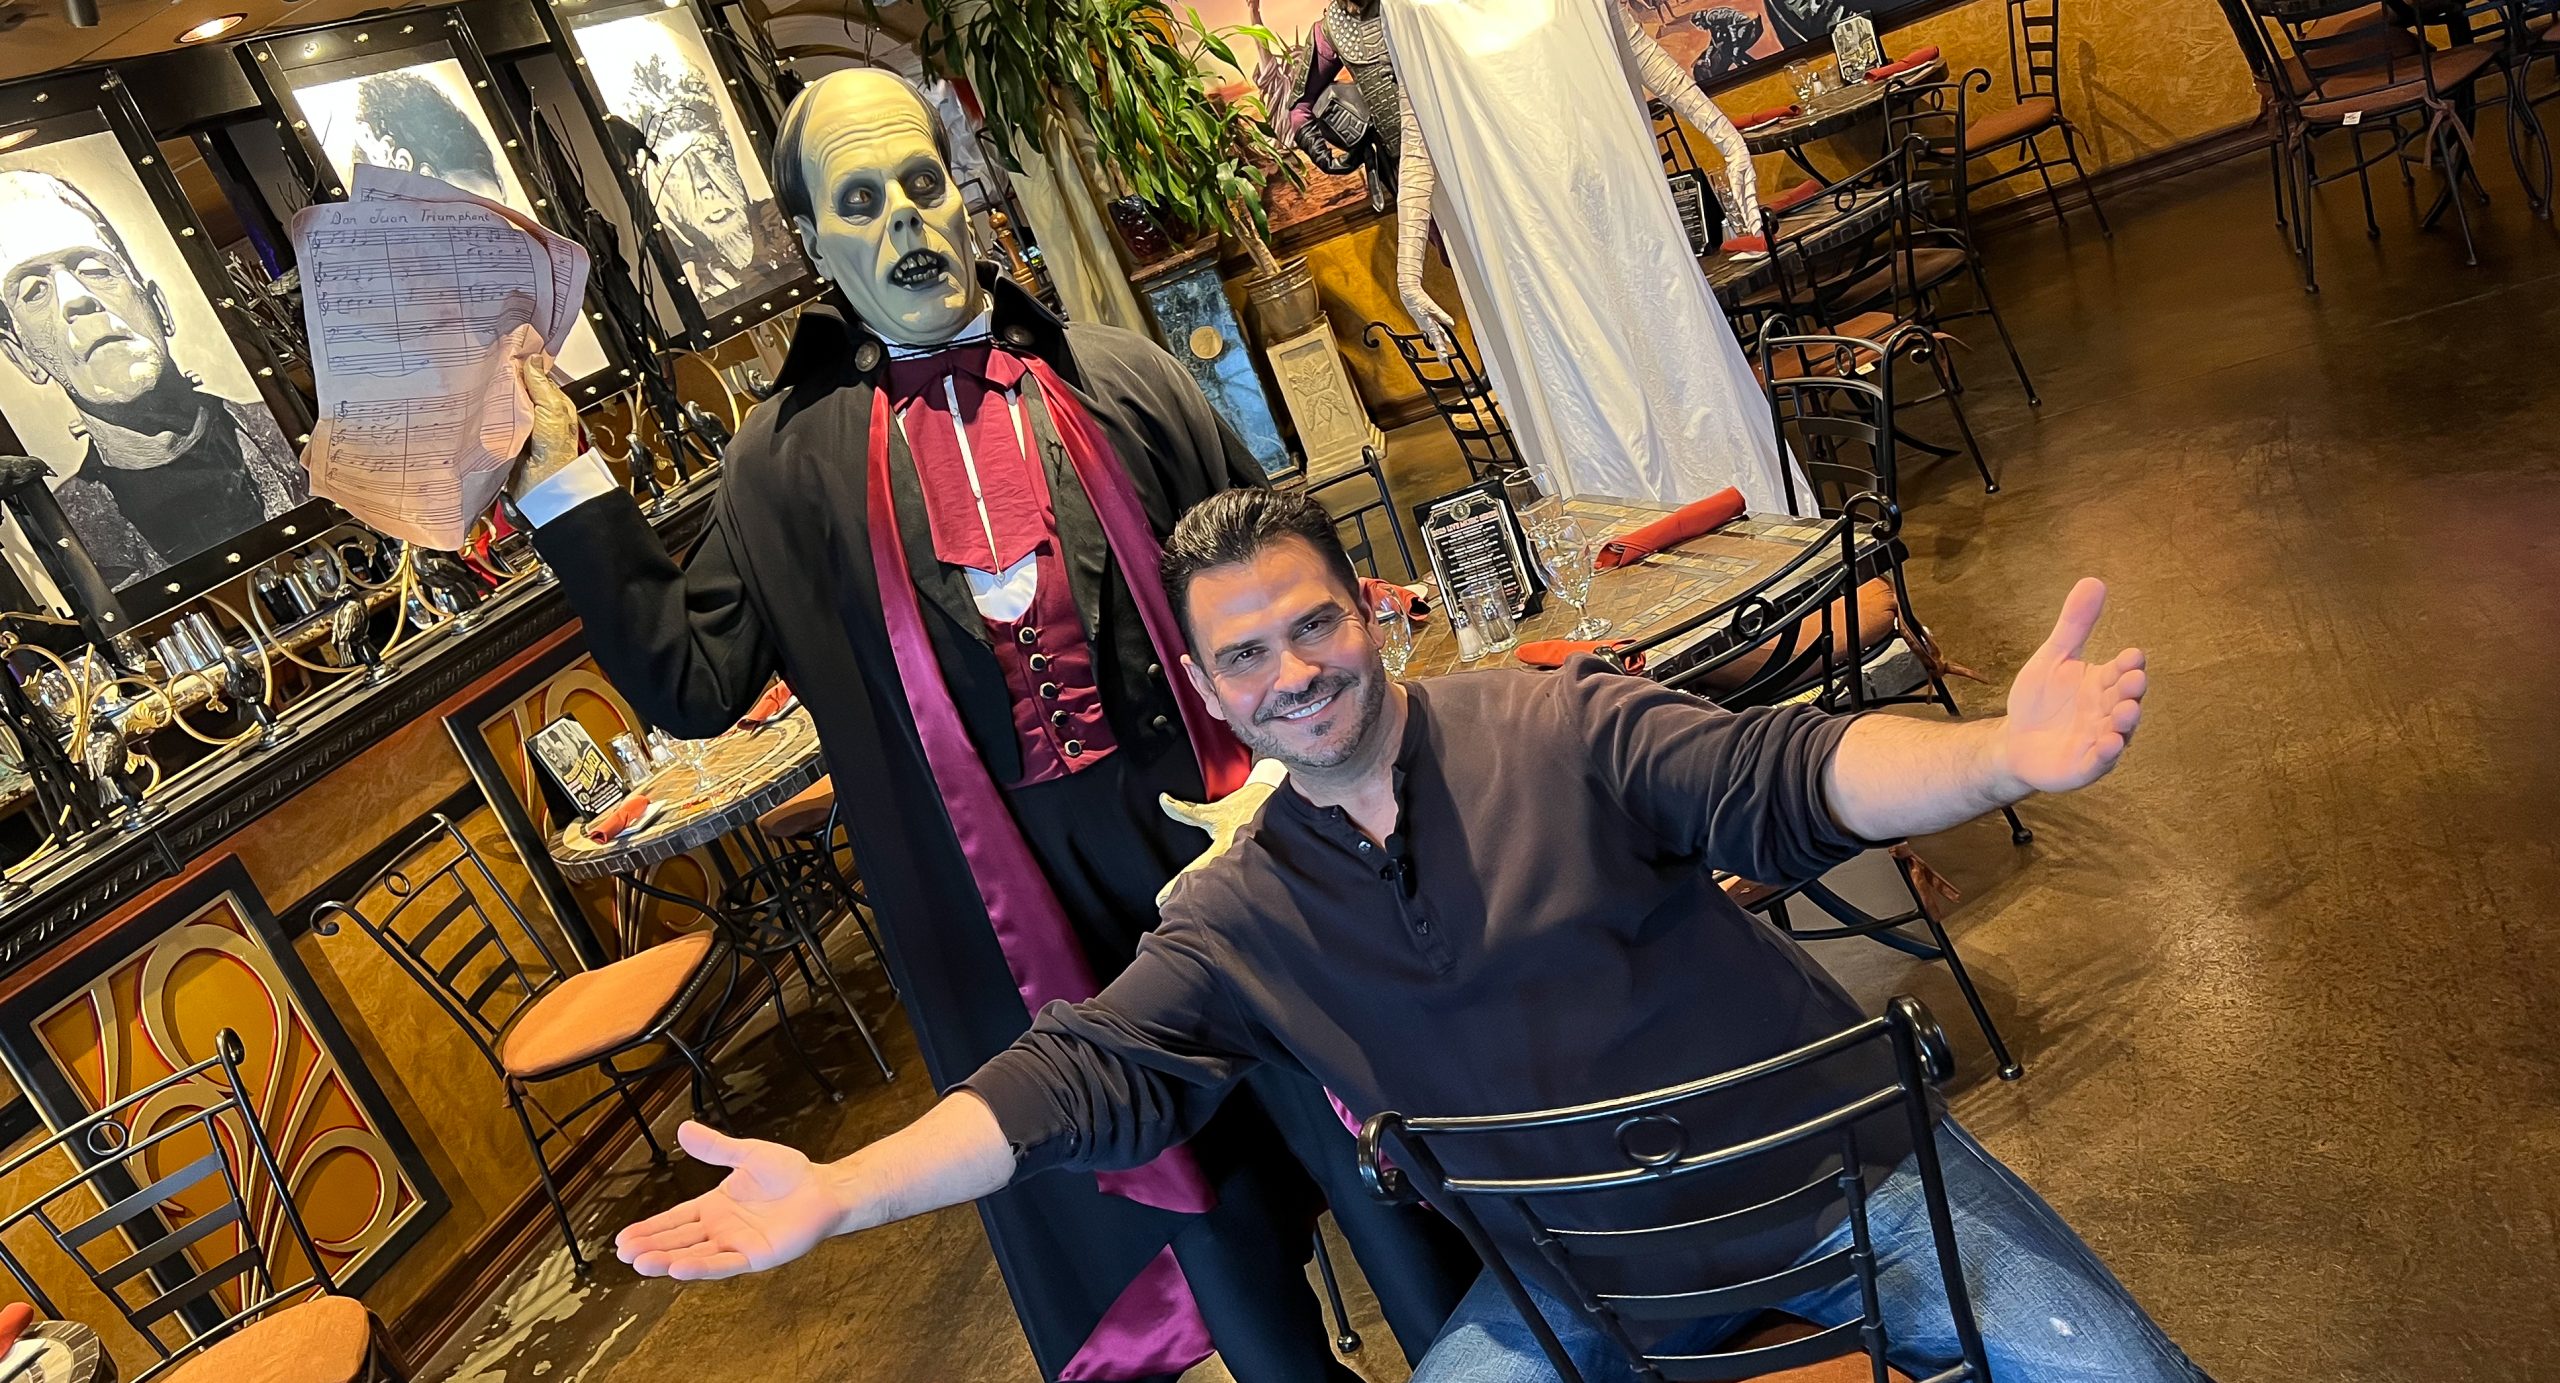 VIDEO: It’s all about the Hollywood monsters at Folsom’s Bacchus House